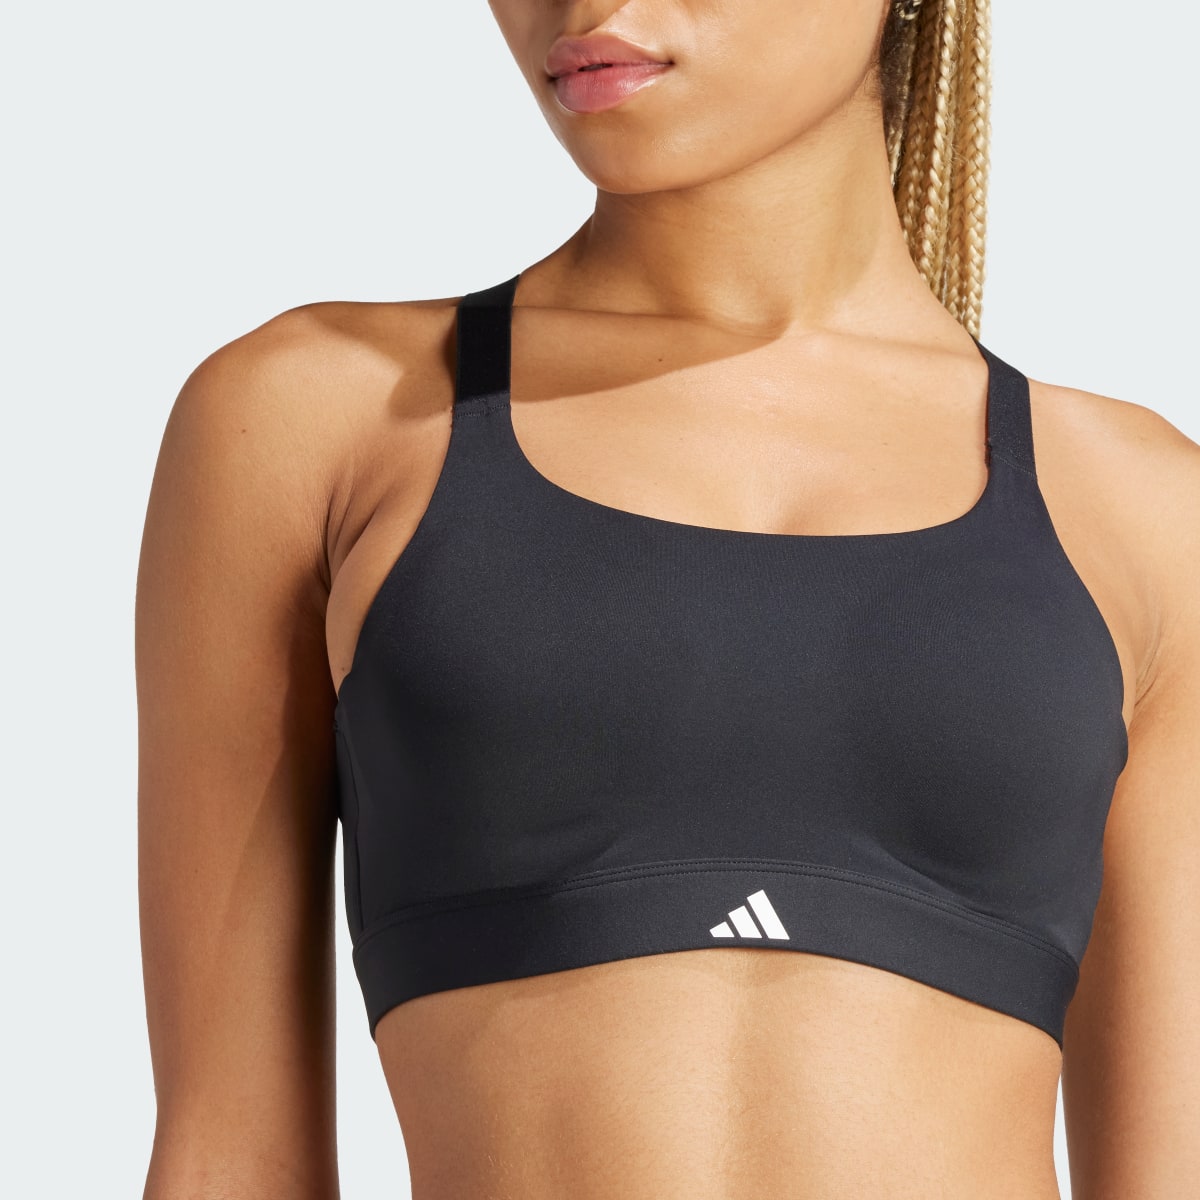 Adidas Brassière de training TLRD Impact Luxe Maintien fort. 6